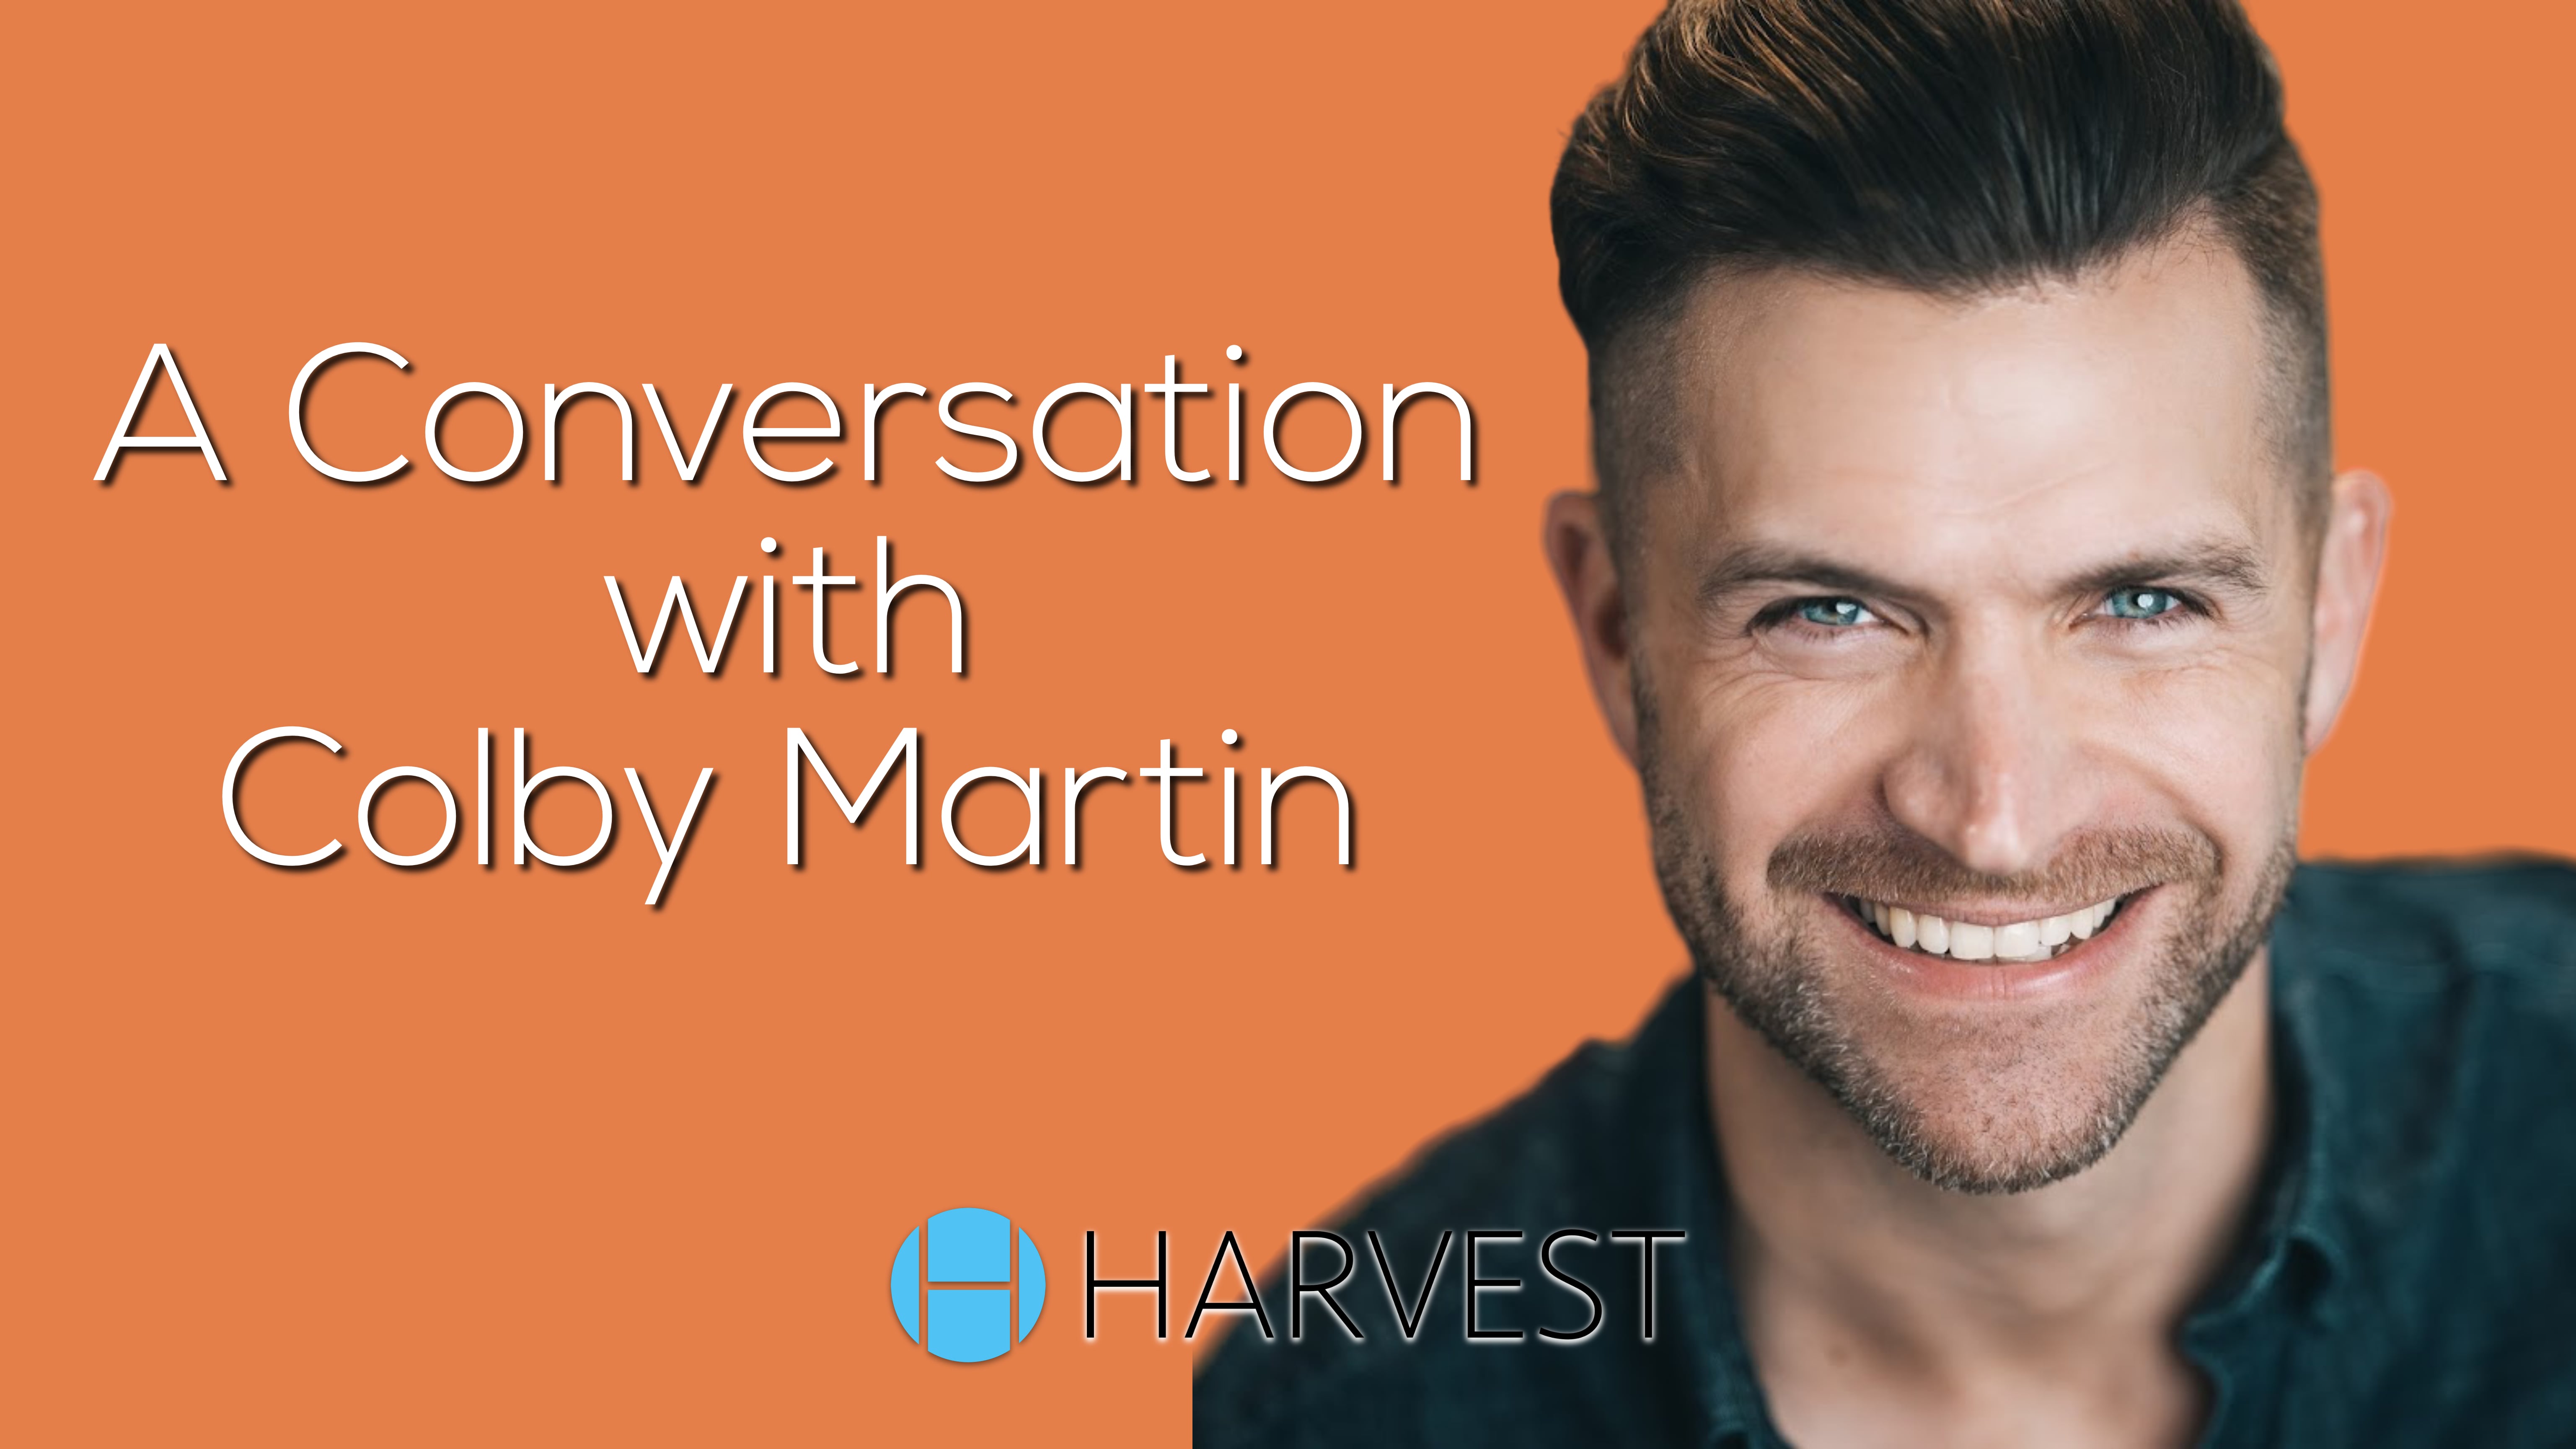 A Conversation with Colby Martin